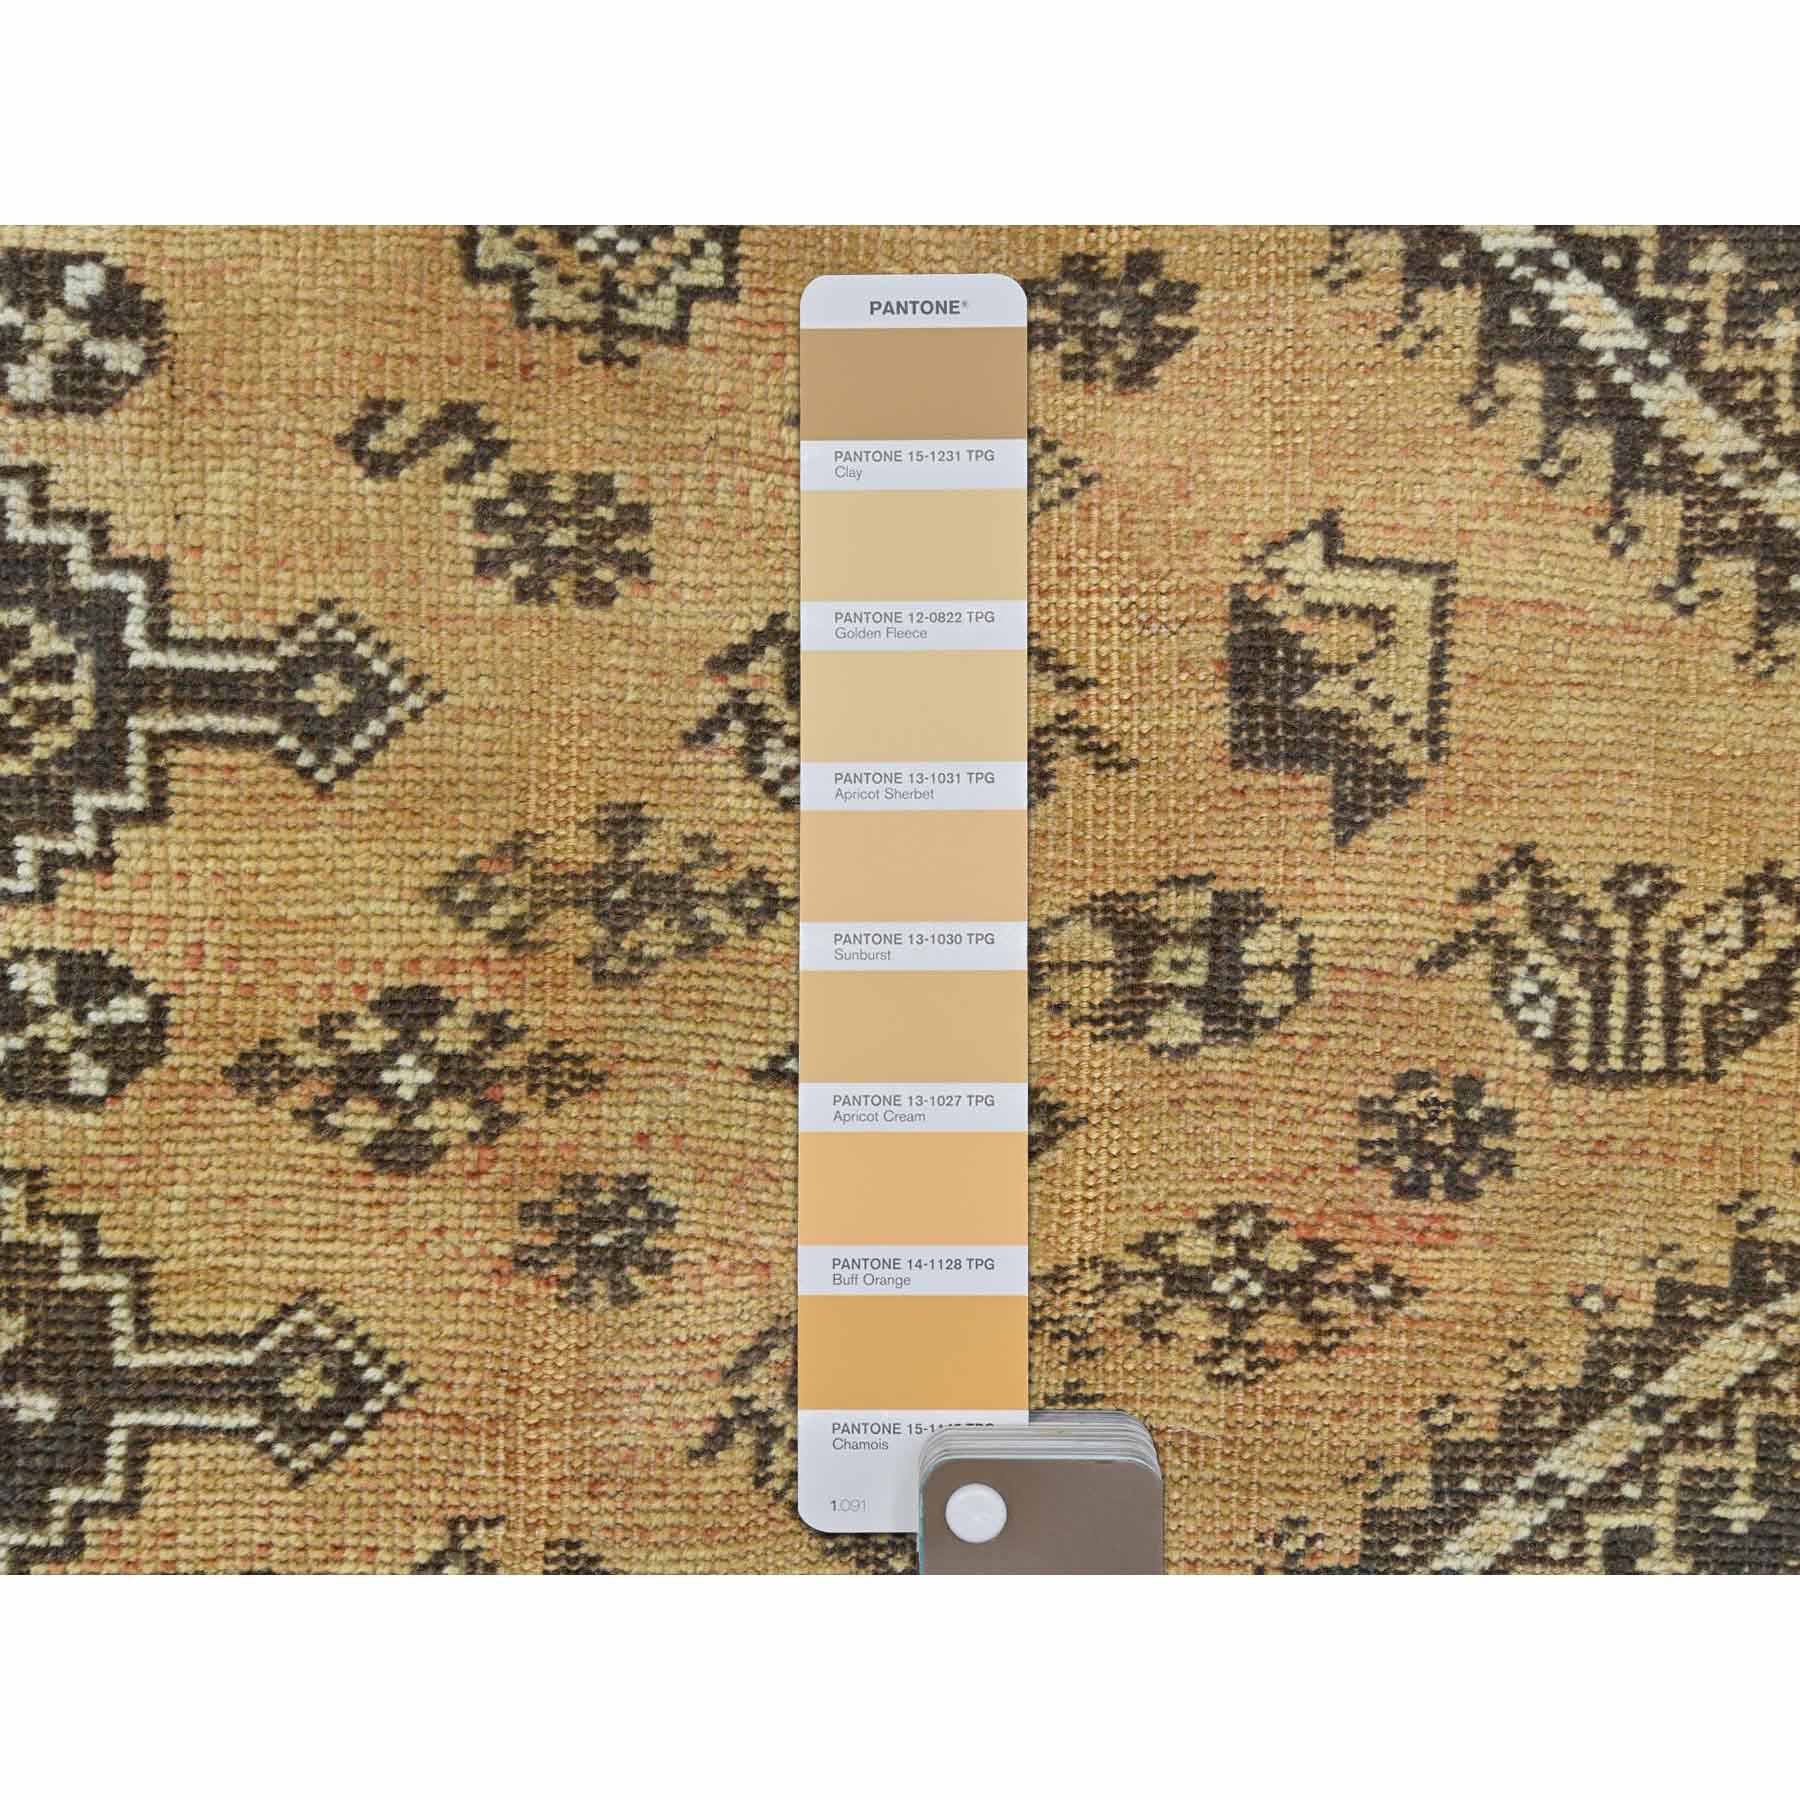 Overdyed-Vintage-Hand-Knotted-Rug-405800